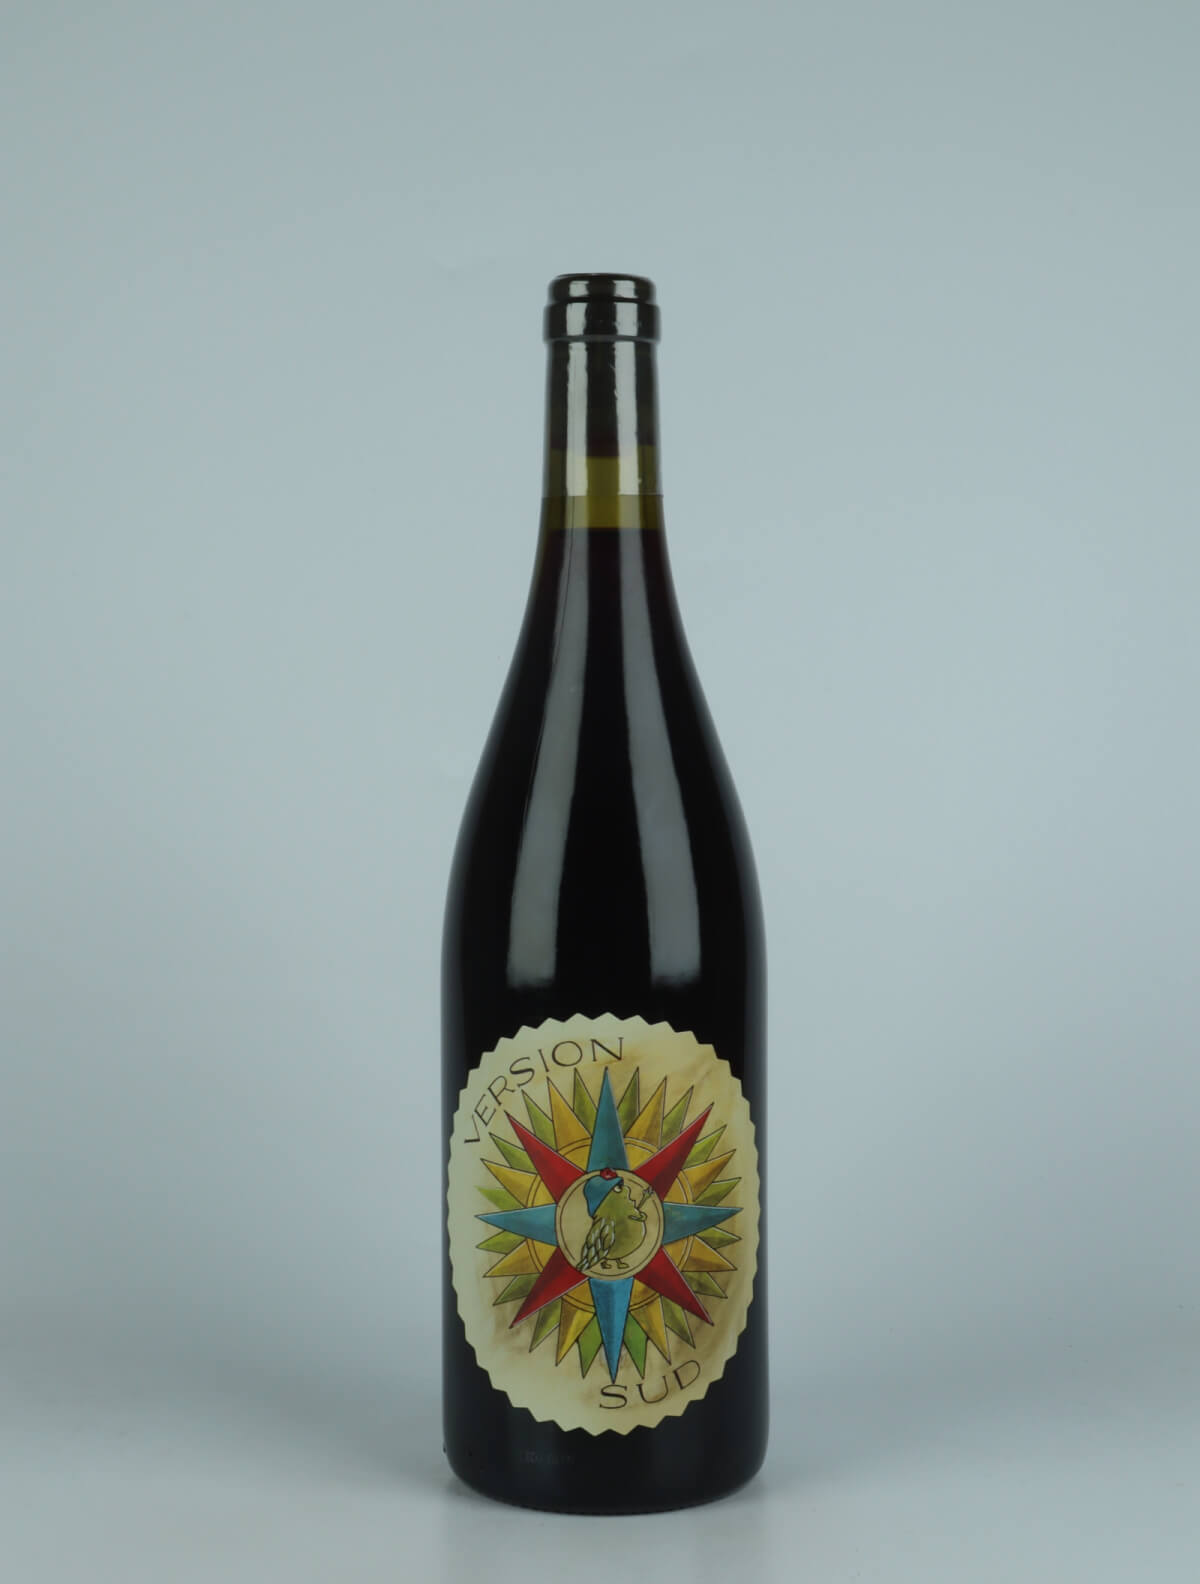 A bottle 2021 Version Sud Red wine from Frédéric Cossard, Rhône in France